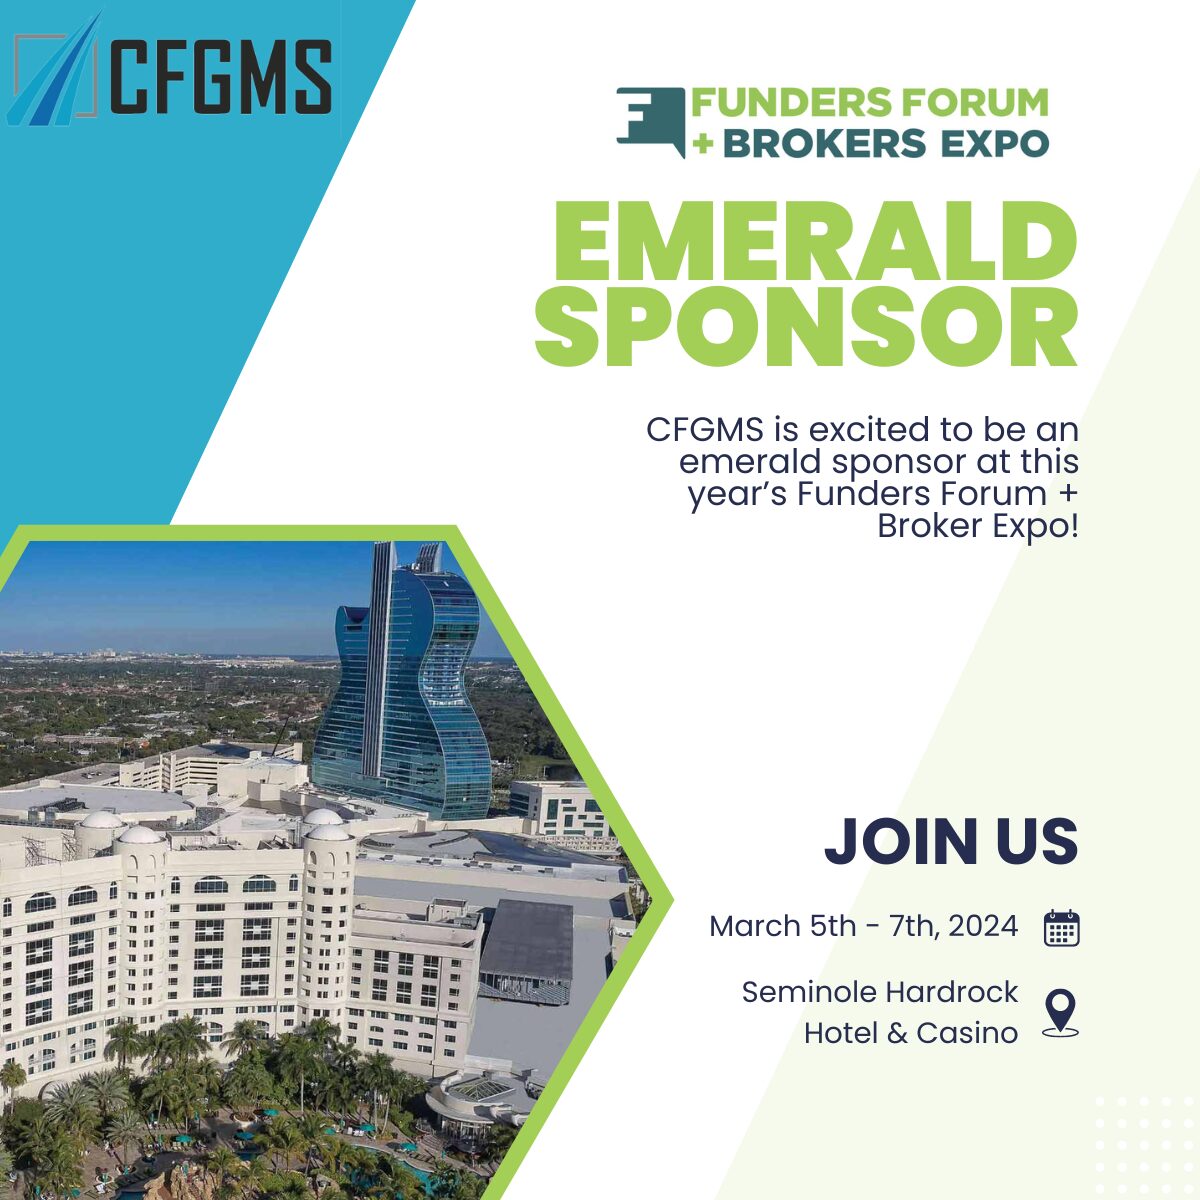 CFGMS is a proud sponsor of this year’s Funders Forum & Brokers Expo 